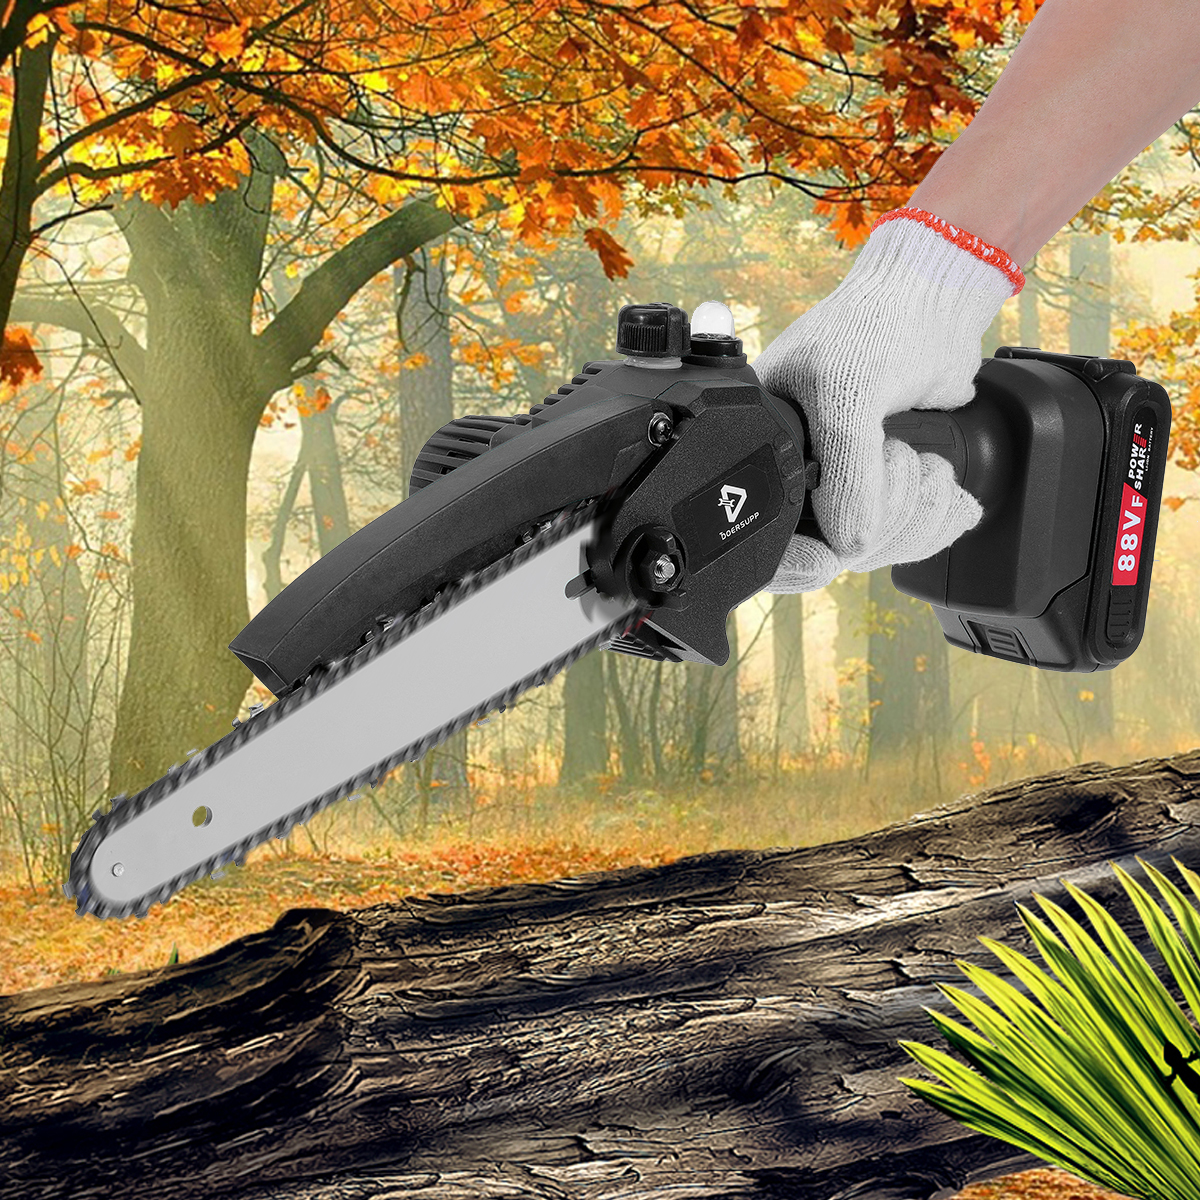 Doersupp-3000W-8-Inch-Portable-Bruless-Electric-Saw-Pruning-Chain-Saw-Rechargeable-Woodworking-Power-1915315-13